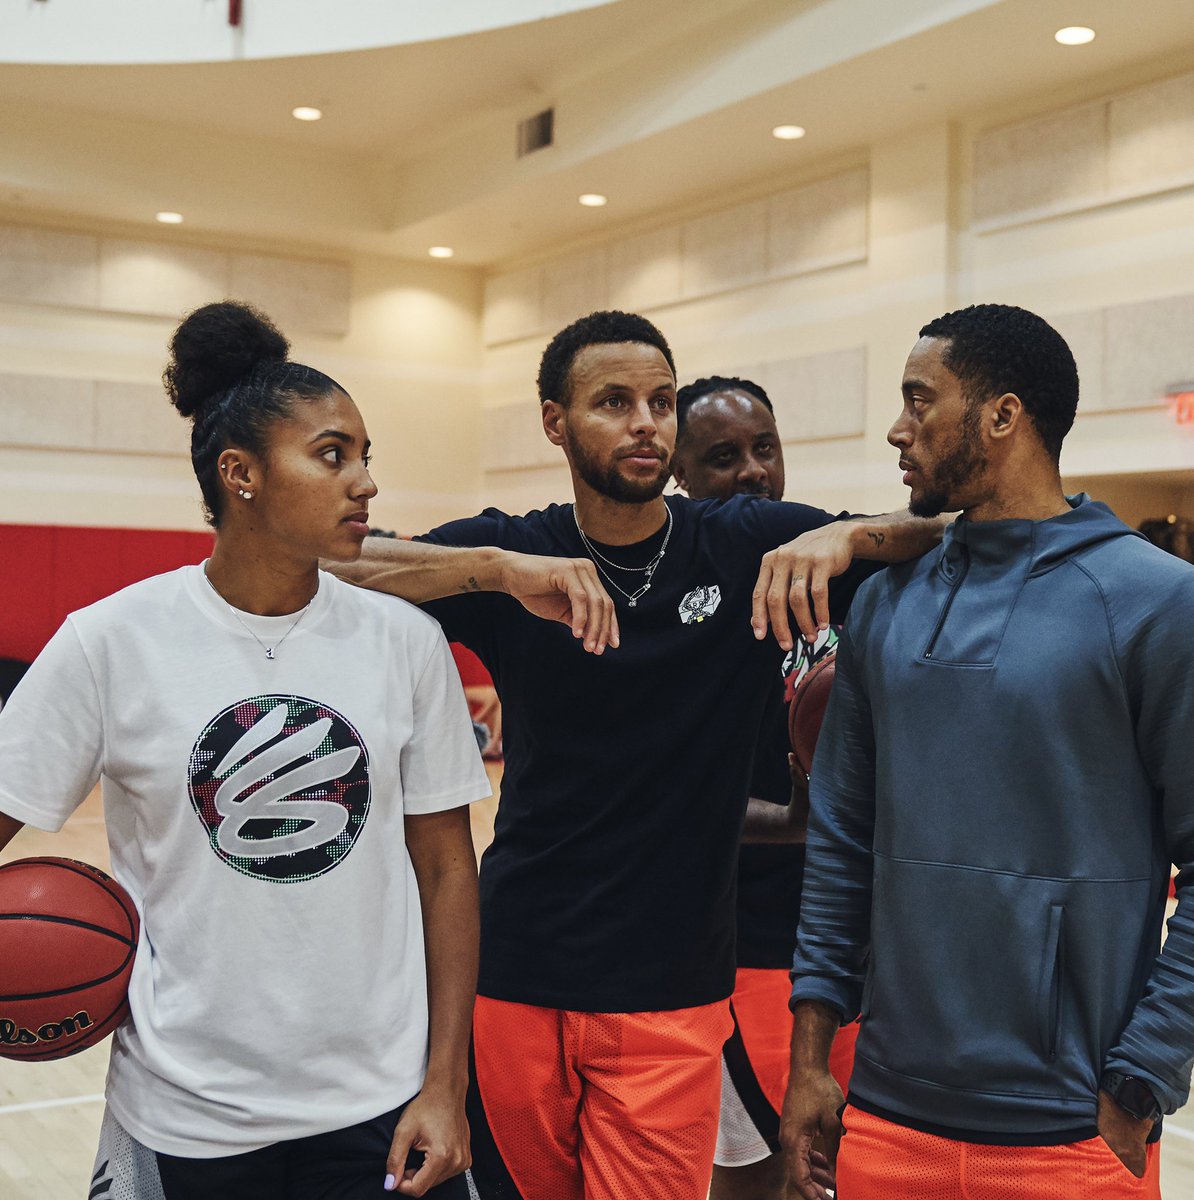 Curry Camp is back and better than ever!! An honor to host some of the most talented young hoopers in the game w/ #currybrand last week. Their journeys are all just beginning. S/o to @azzi_35 for going from camper ➡️ coach and @Chase helping make this the best camp in the 🌎🙏🏽